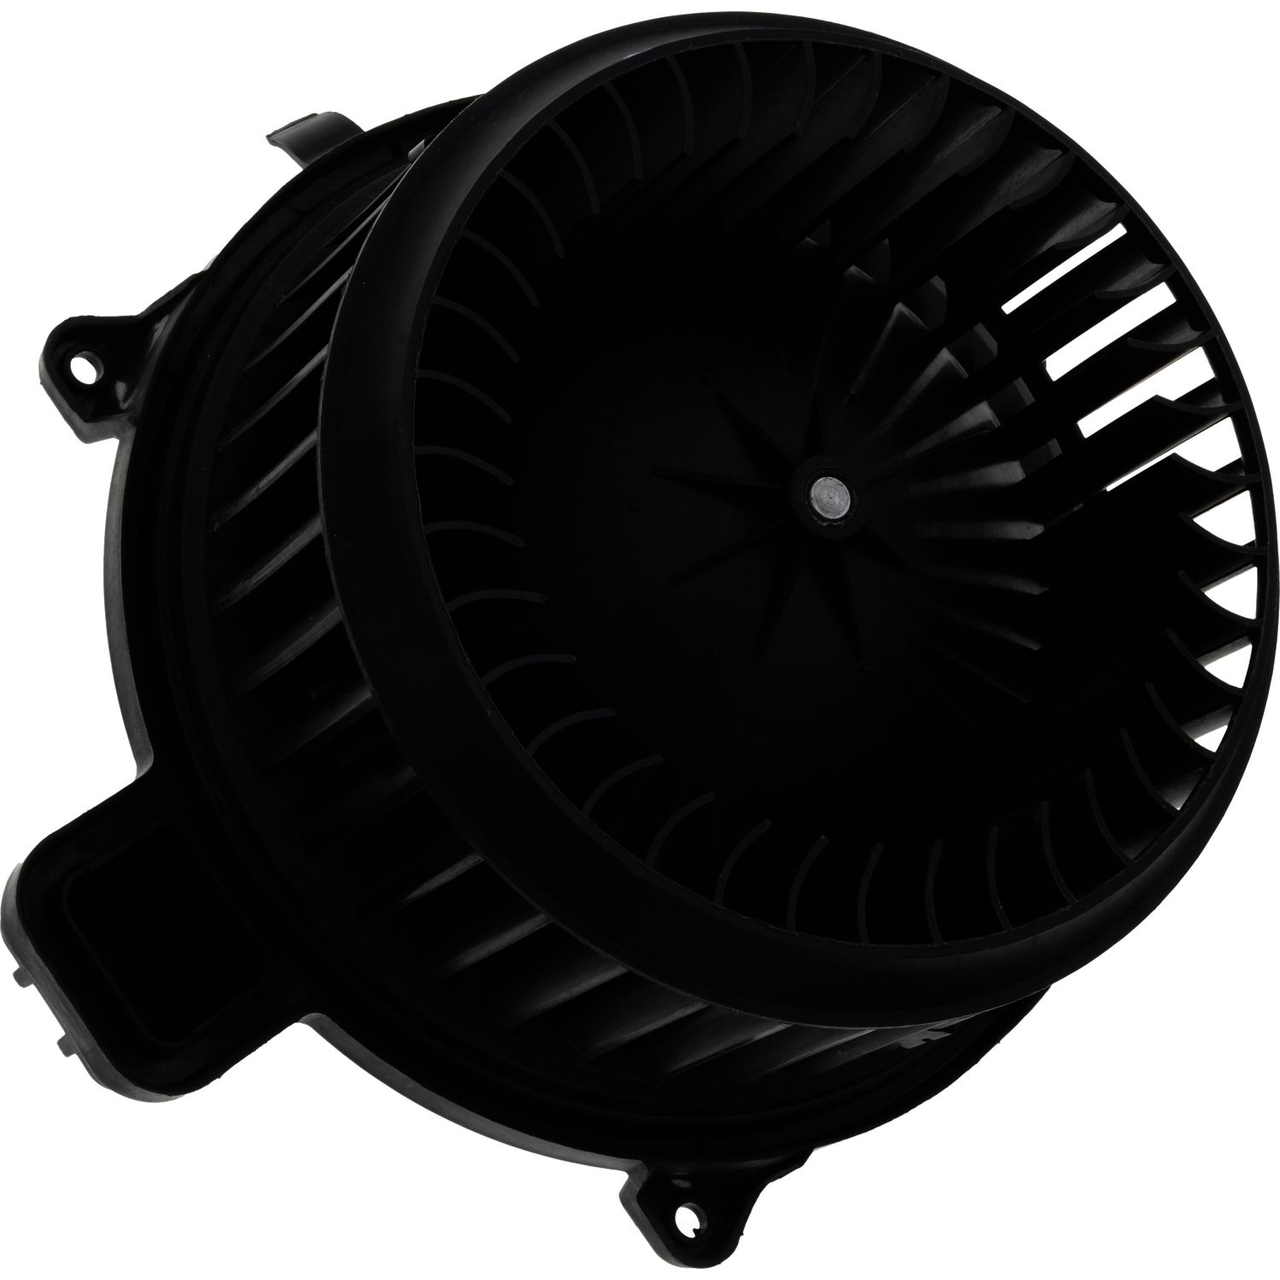 10-11 Milan Replaces 13369460 AE5Z19805D 75874 PM9381 10-12 MKZ Front AC Heater Blower Motor with Fan Compatible with 10-12 Fusion 